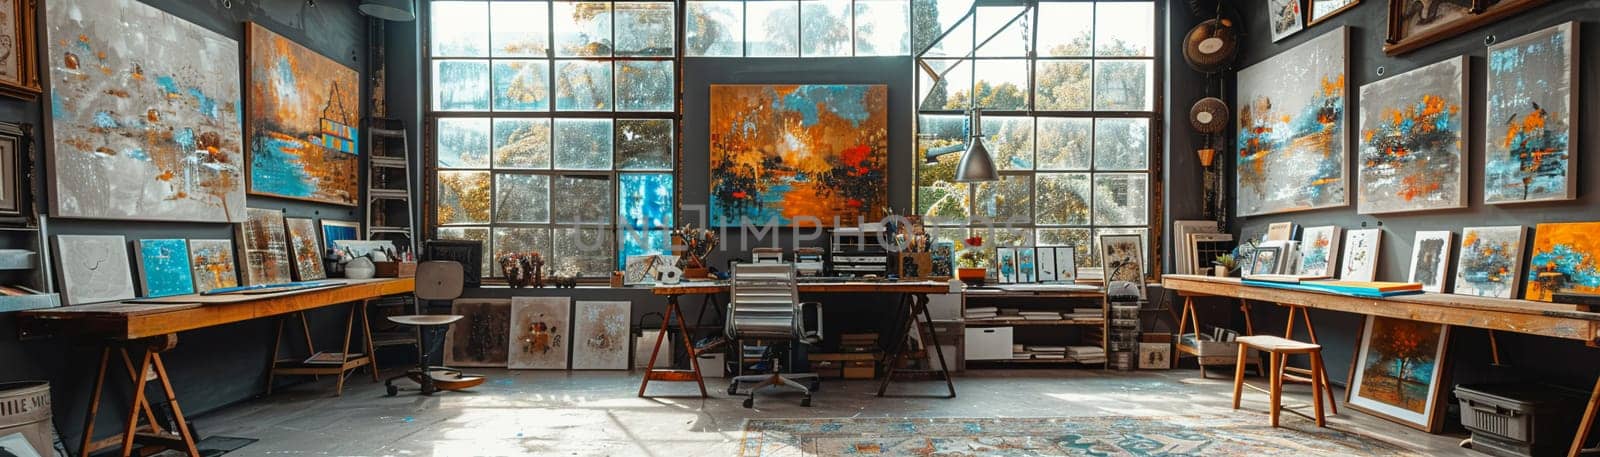 Modern Art Studio Teeming with Creativity and Commerce, The swirl of artists and canvases blurs into a hub of creative business and art sales.